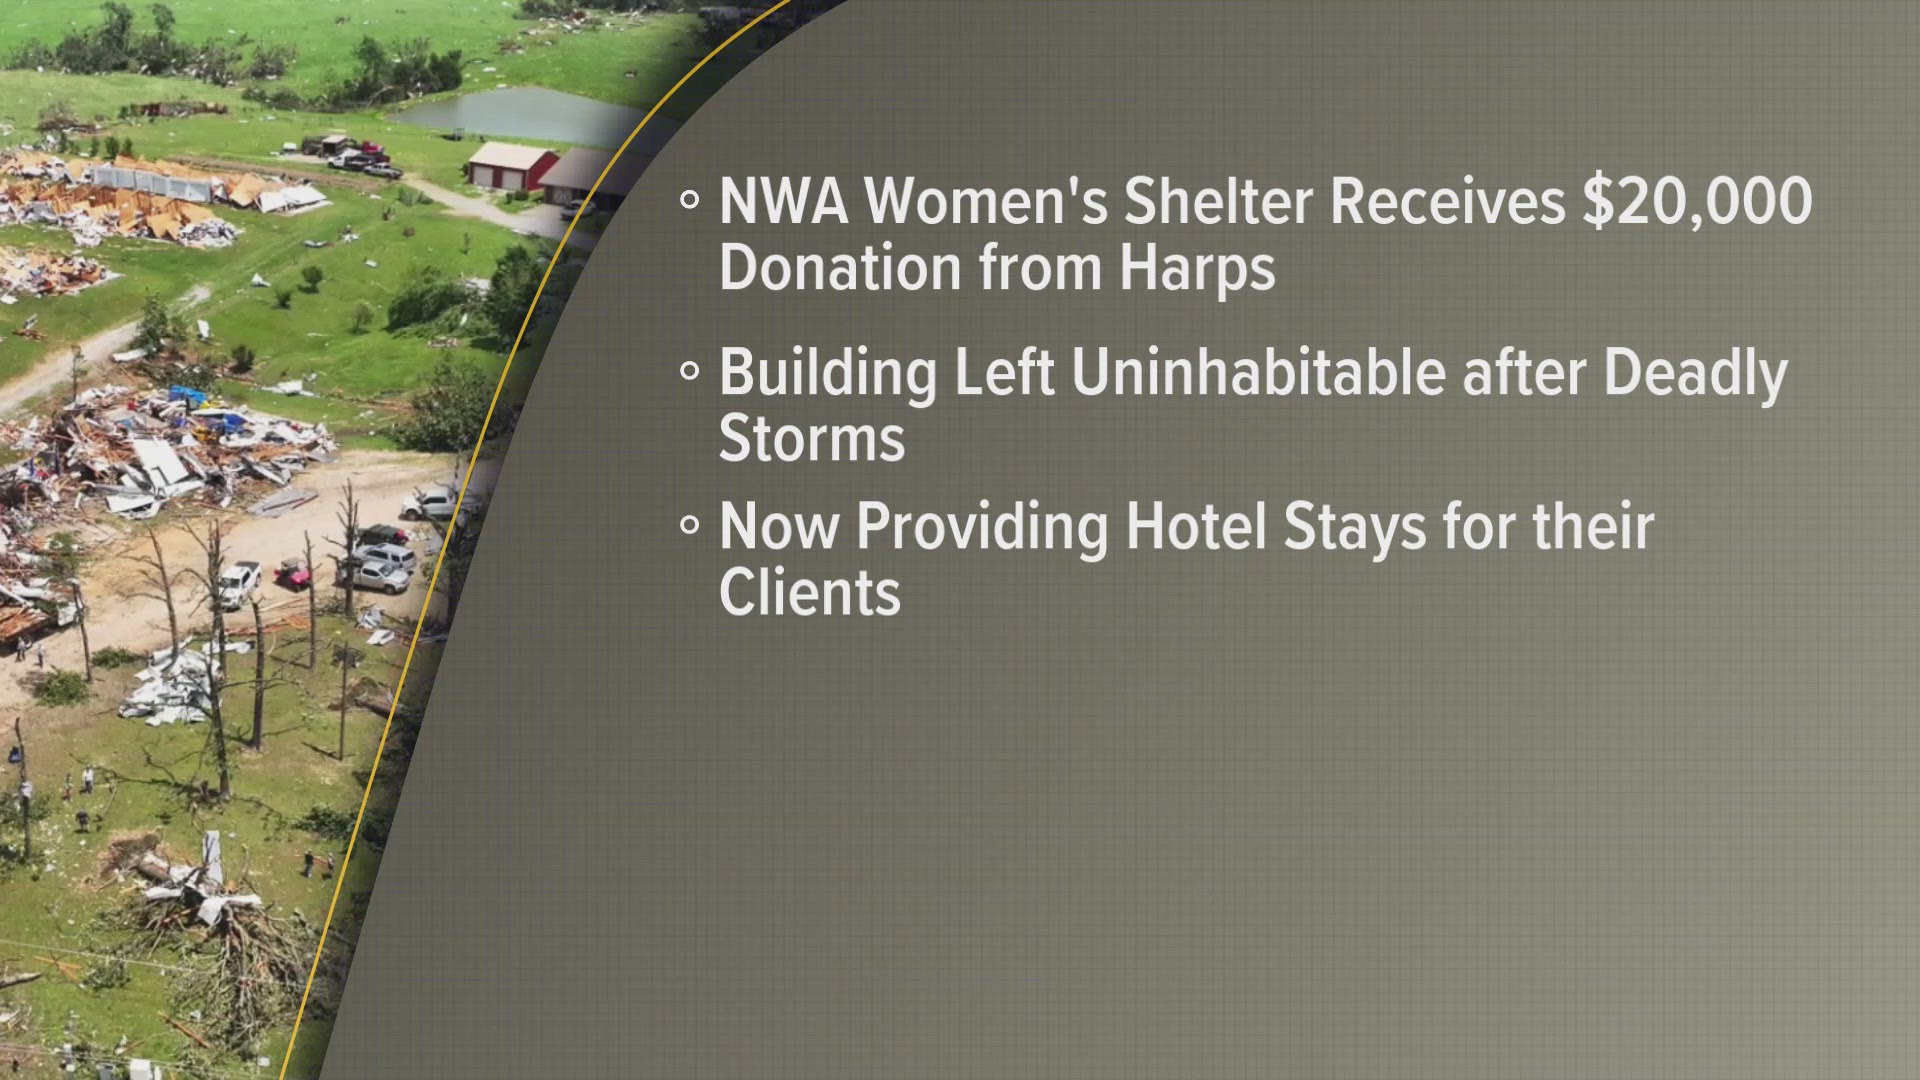 Although they cannot currently house clients in the shelter, NWAWS said they are "pivoting to providing hotel stays."